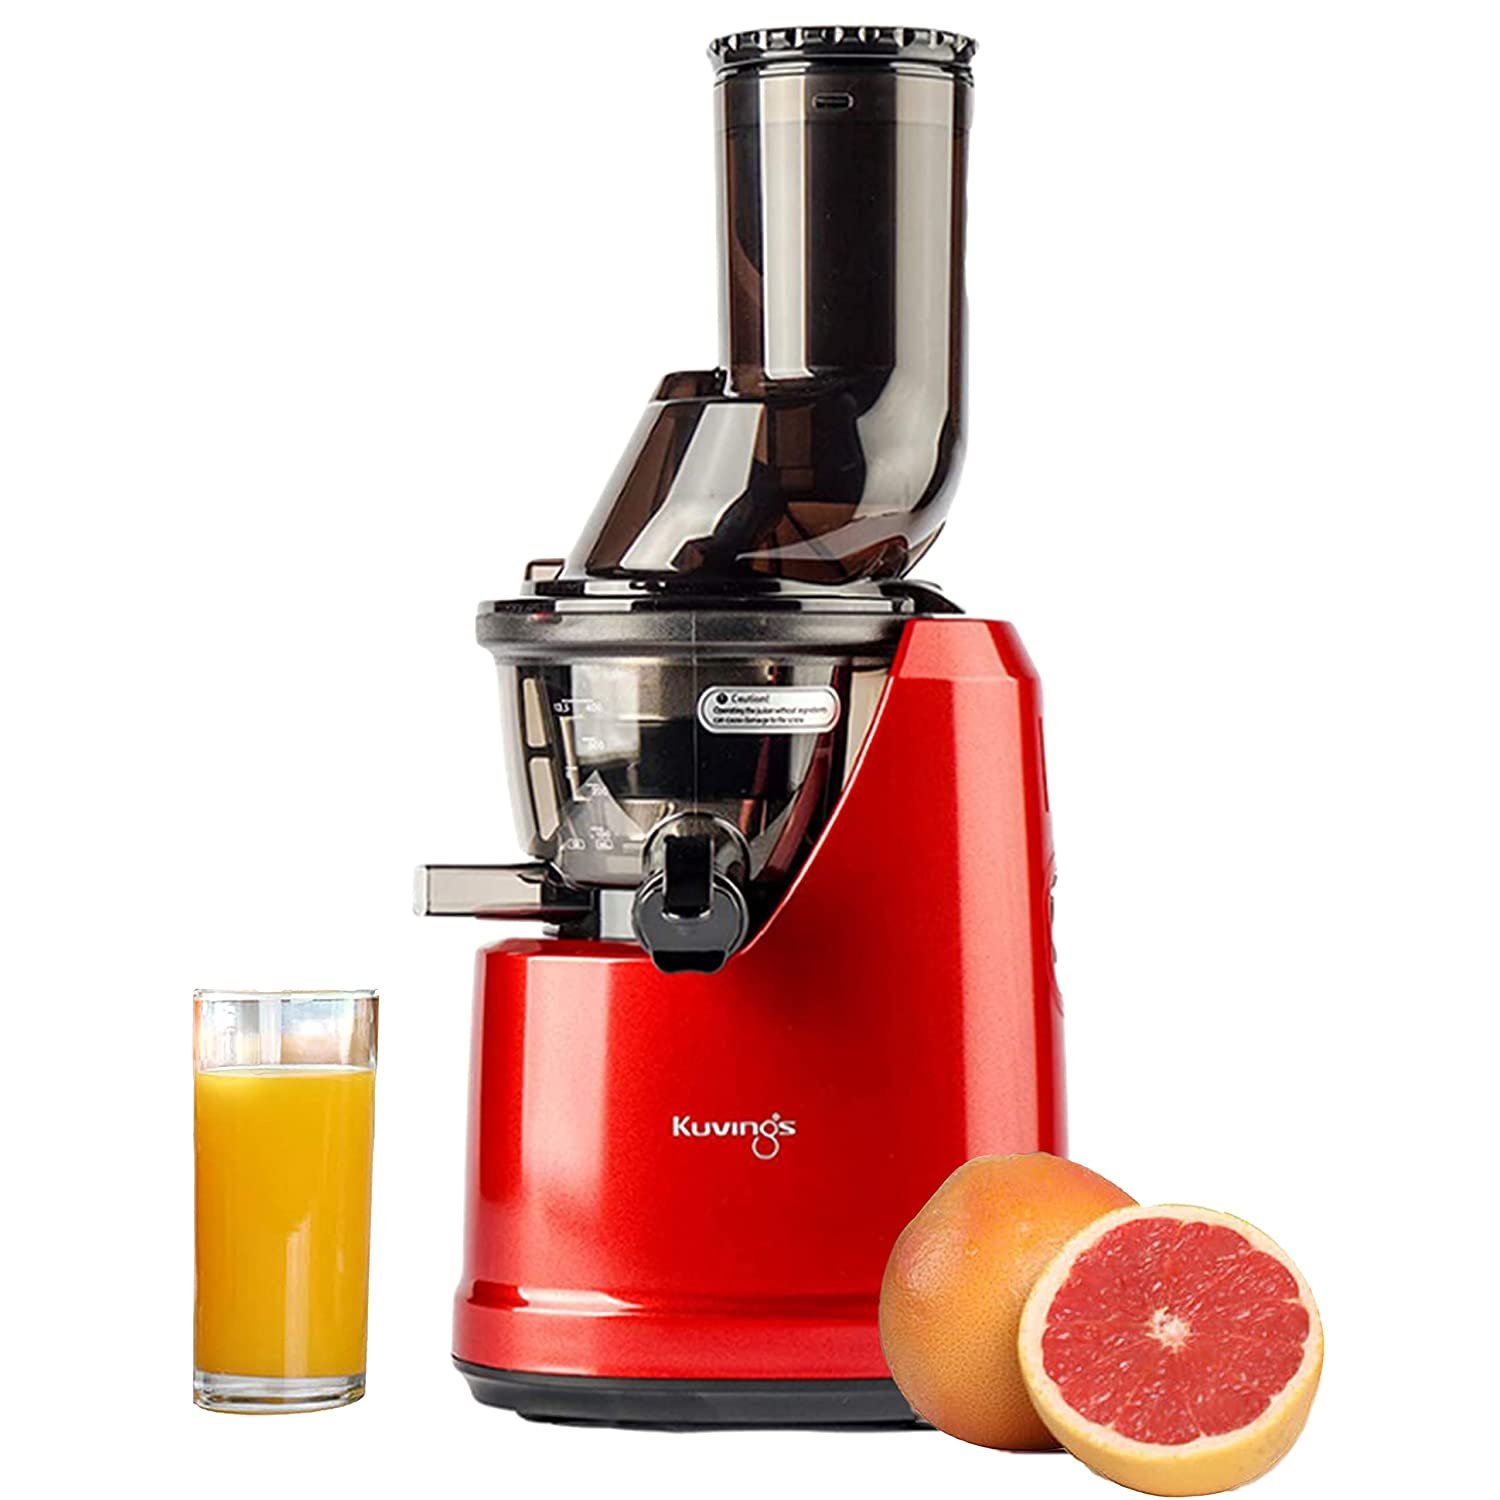 Kuvings B1700 Professional Cold Press Whole Slow Juicer, Patented JMCS Technology